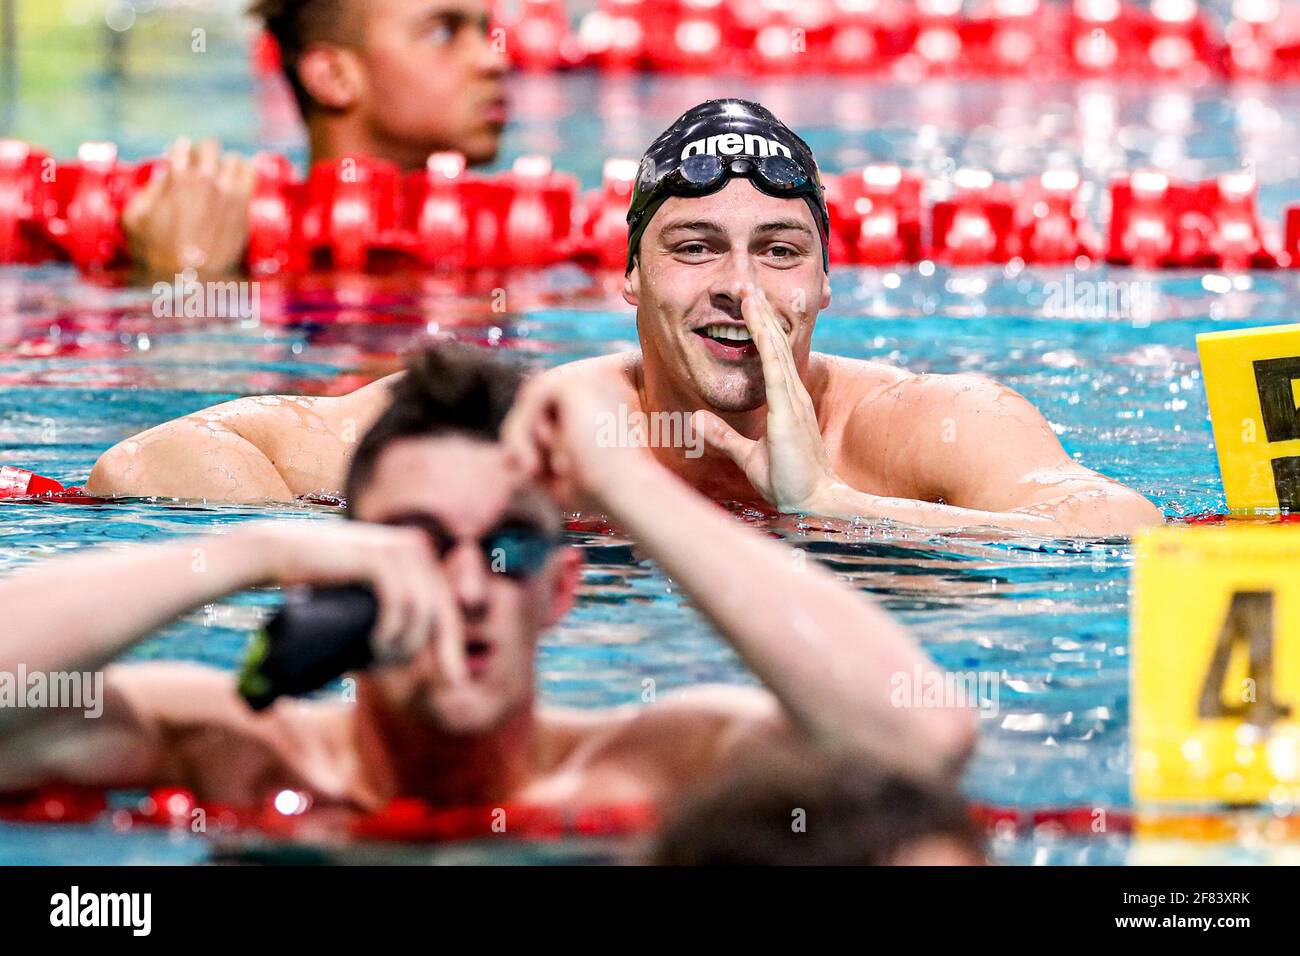 EINDHOVEN, NETHERLANDS - APRIL 11: Jesse Puts competing in the Men 50m Butterfly Finals during the Eindhoven Qualification Meet at Pieter van den Hoogenband zwemstadion on April 11, 2021 in Eindhoven, Netherlands (Photo by Marcel ter Bals/Orange Pictures) Stock Photo